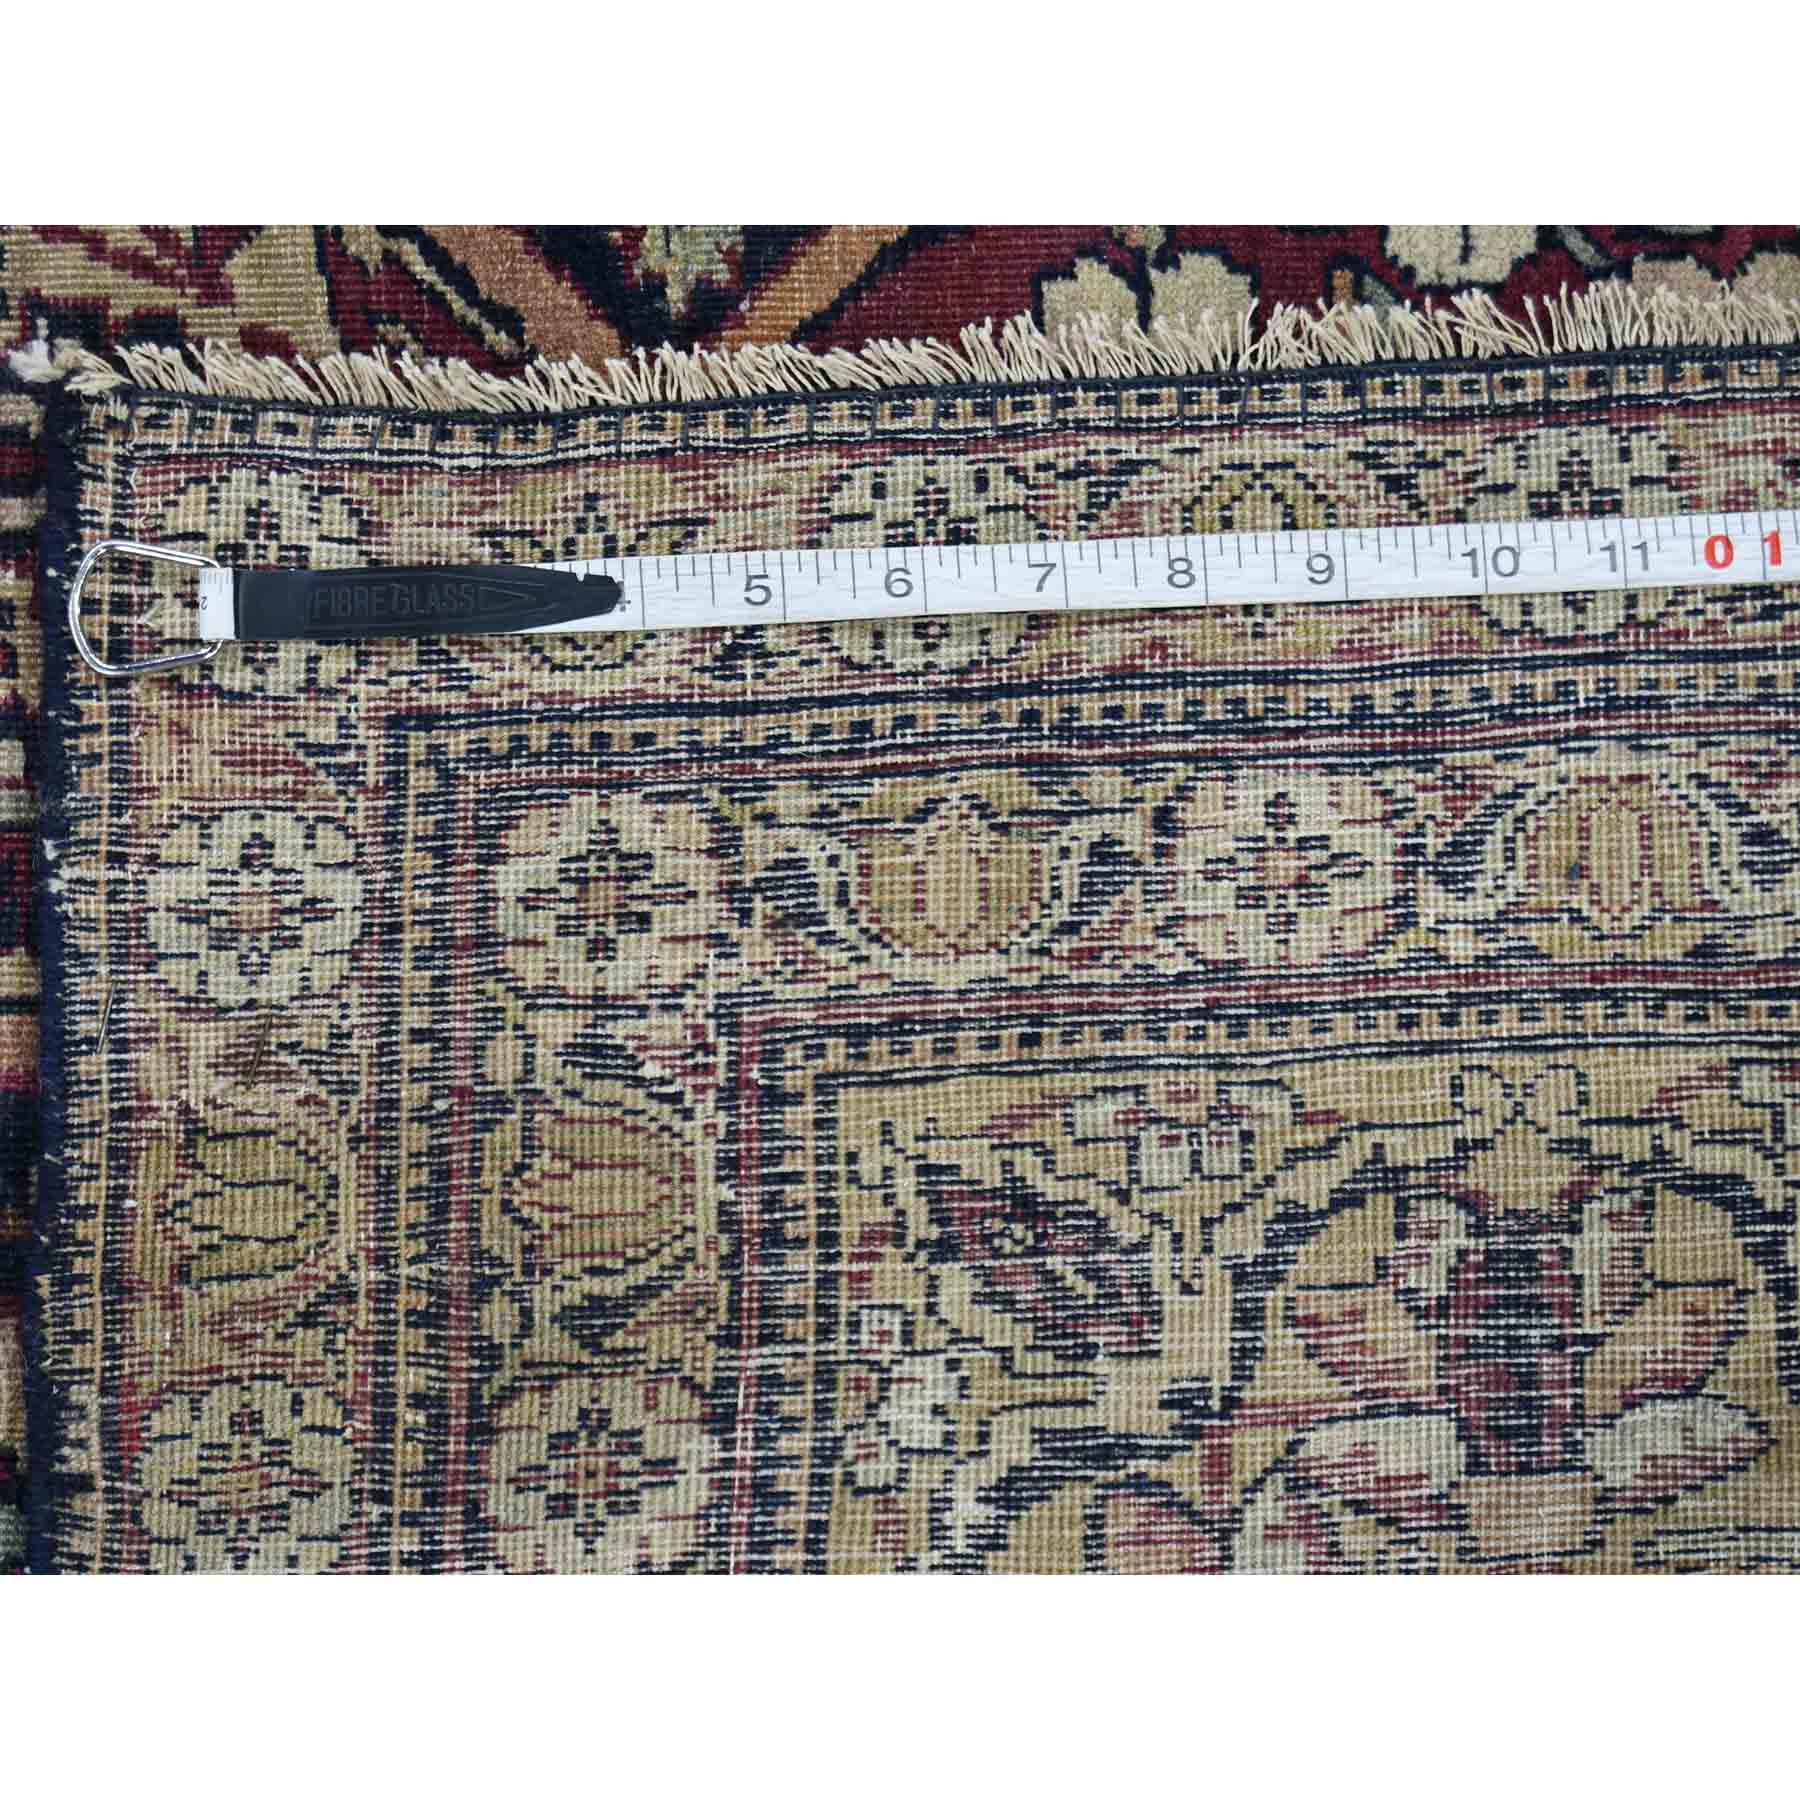 14-x16-9  Antique Persian Kerman Shah Good Condition Even Wear Hand-Knotted Oversize Oriental Rug 